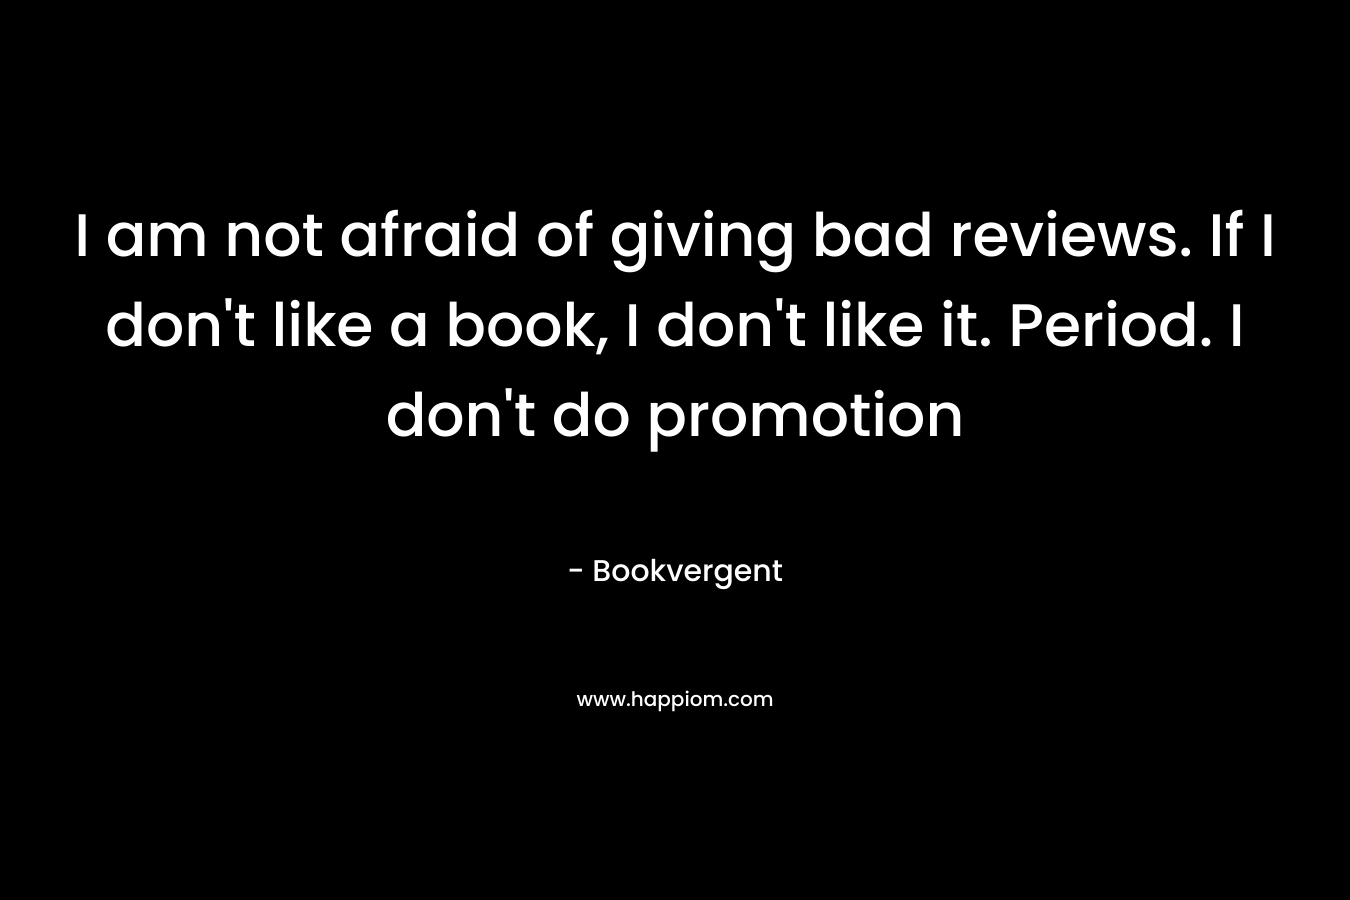 I am not afraid of giving bad reviews. If I don’t like a book, I don’t like it. Period. I don’t do promotion – Bookvergent